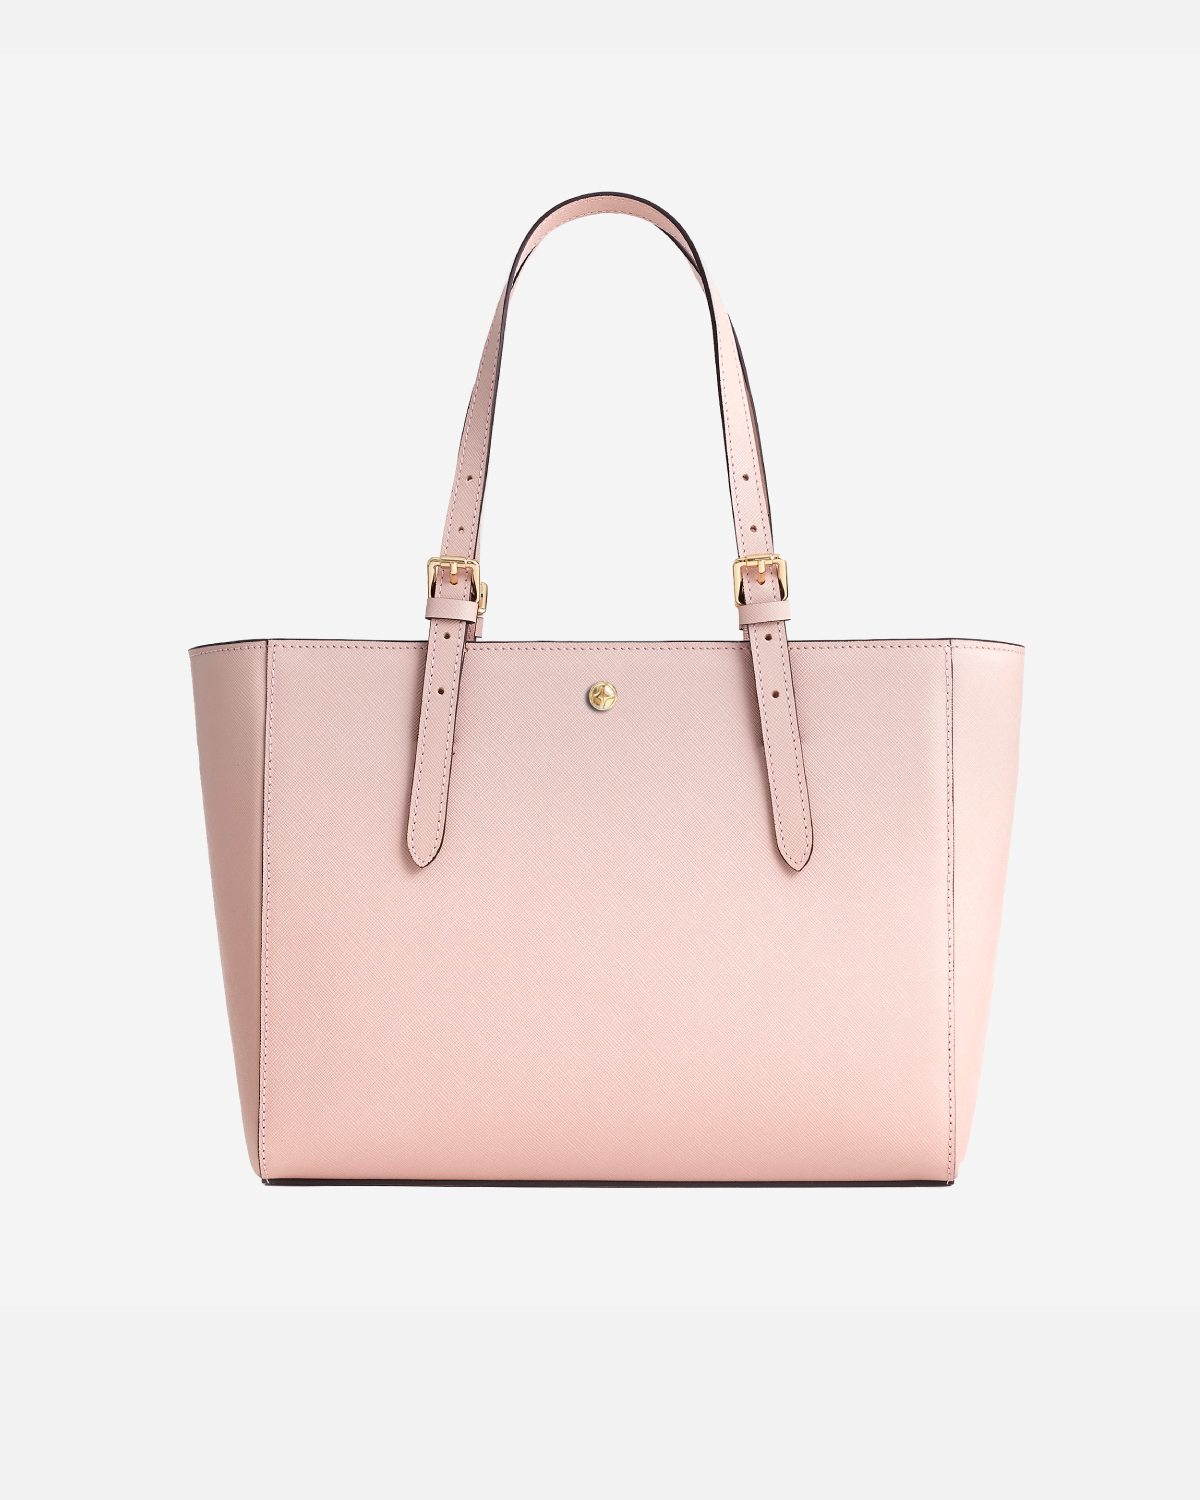 VERA The First Bag in Soft Pink